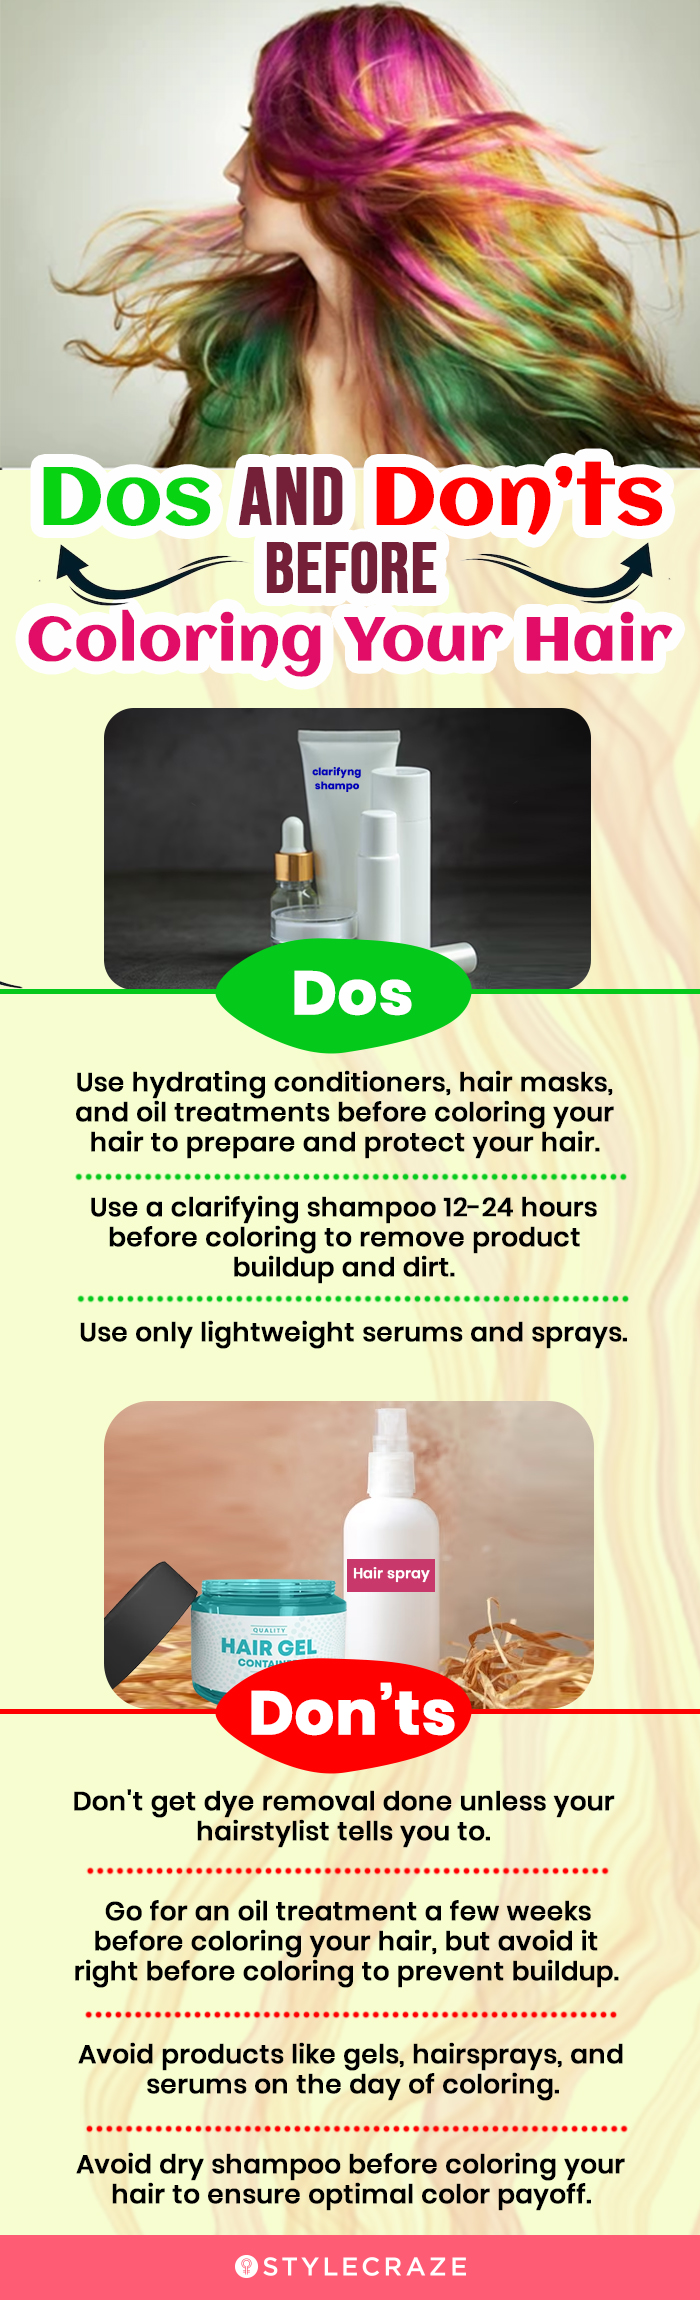 dos and don’ts before coloring your hair (infographic)